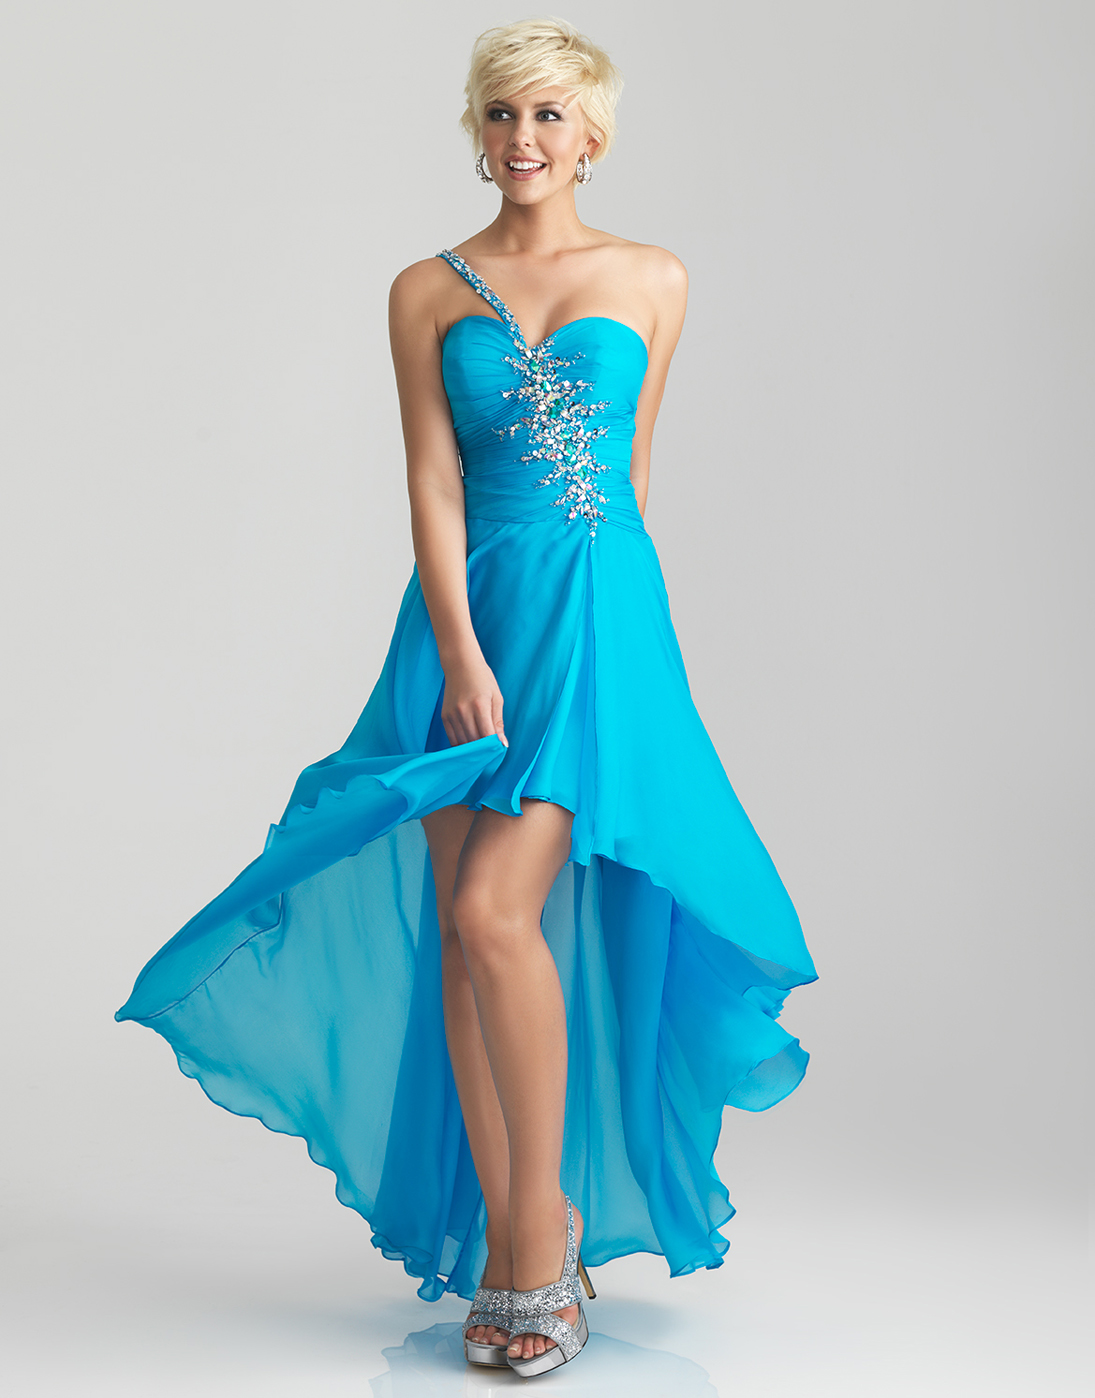 Turquoise Prom Dresses | Dressed Up Girl